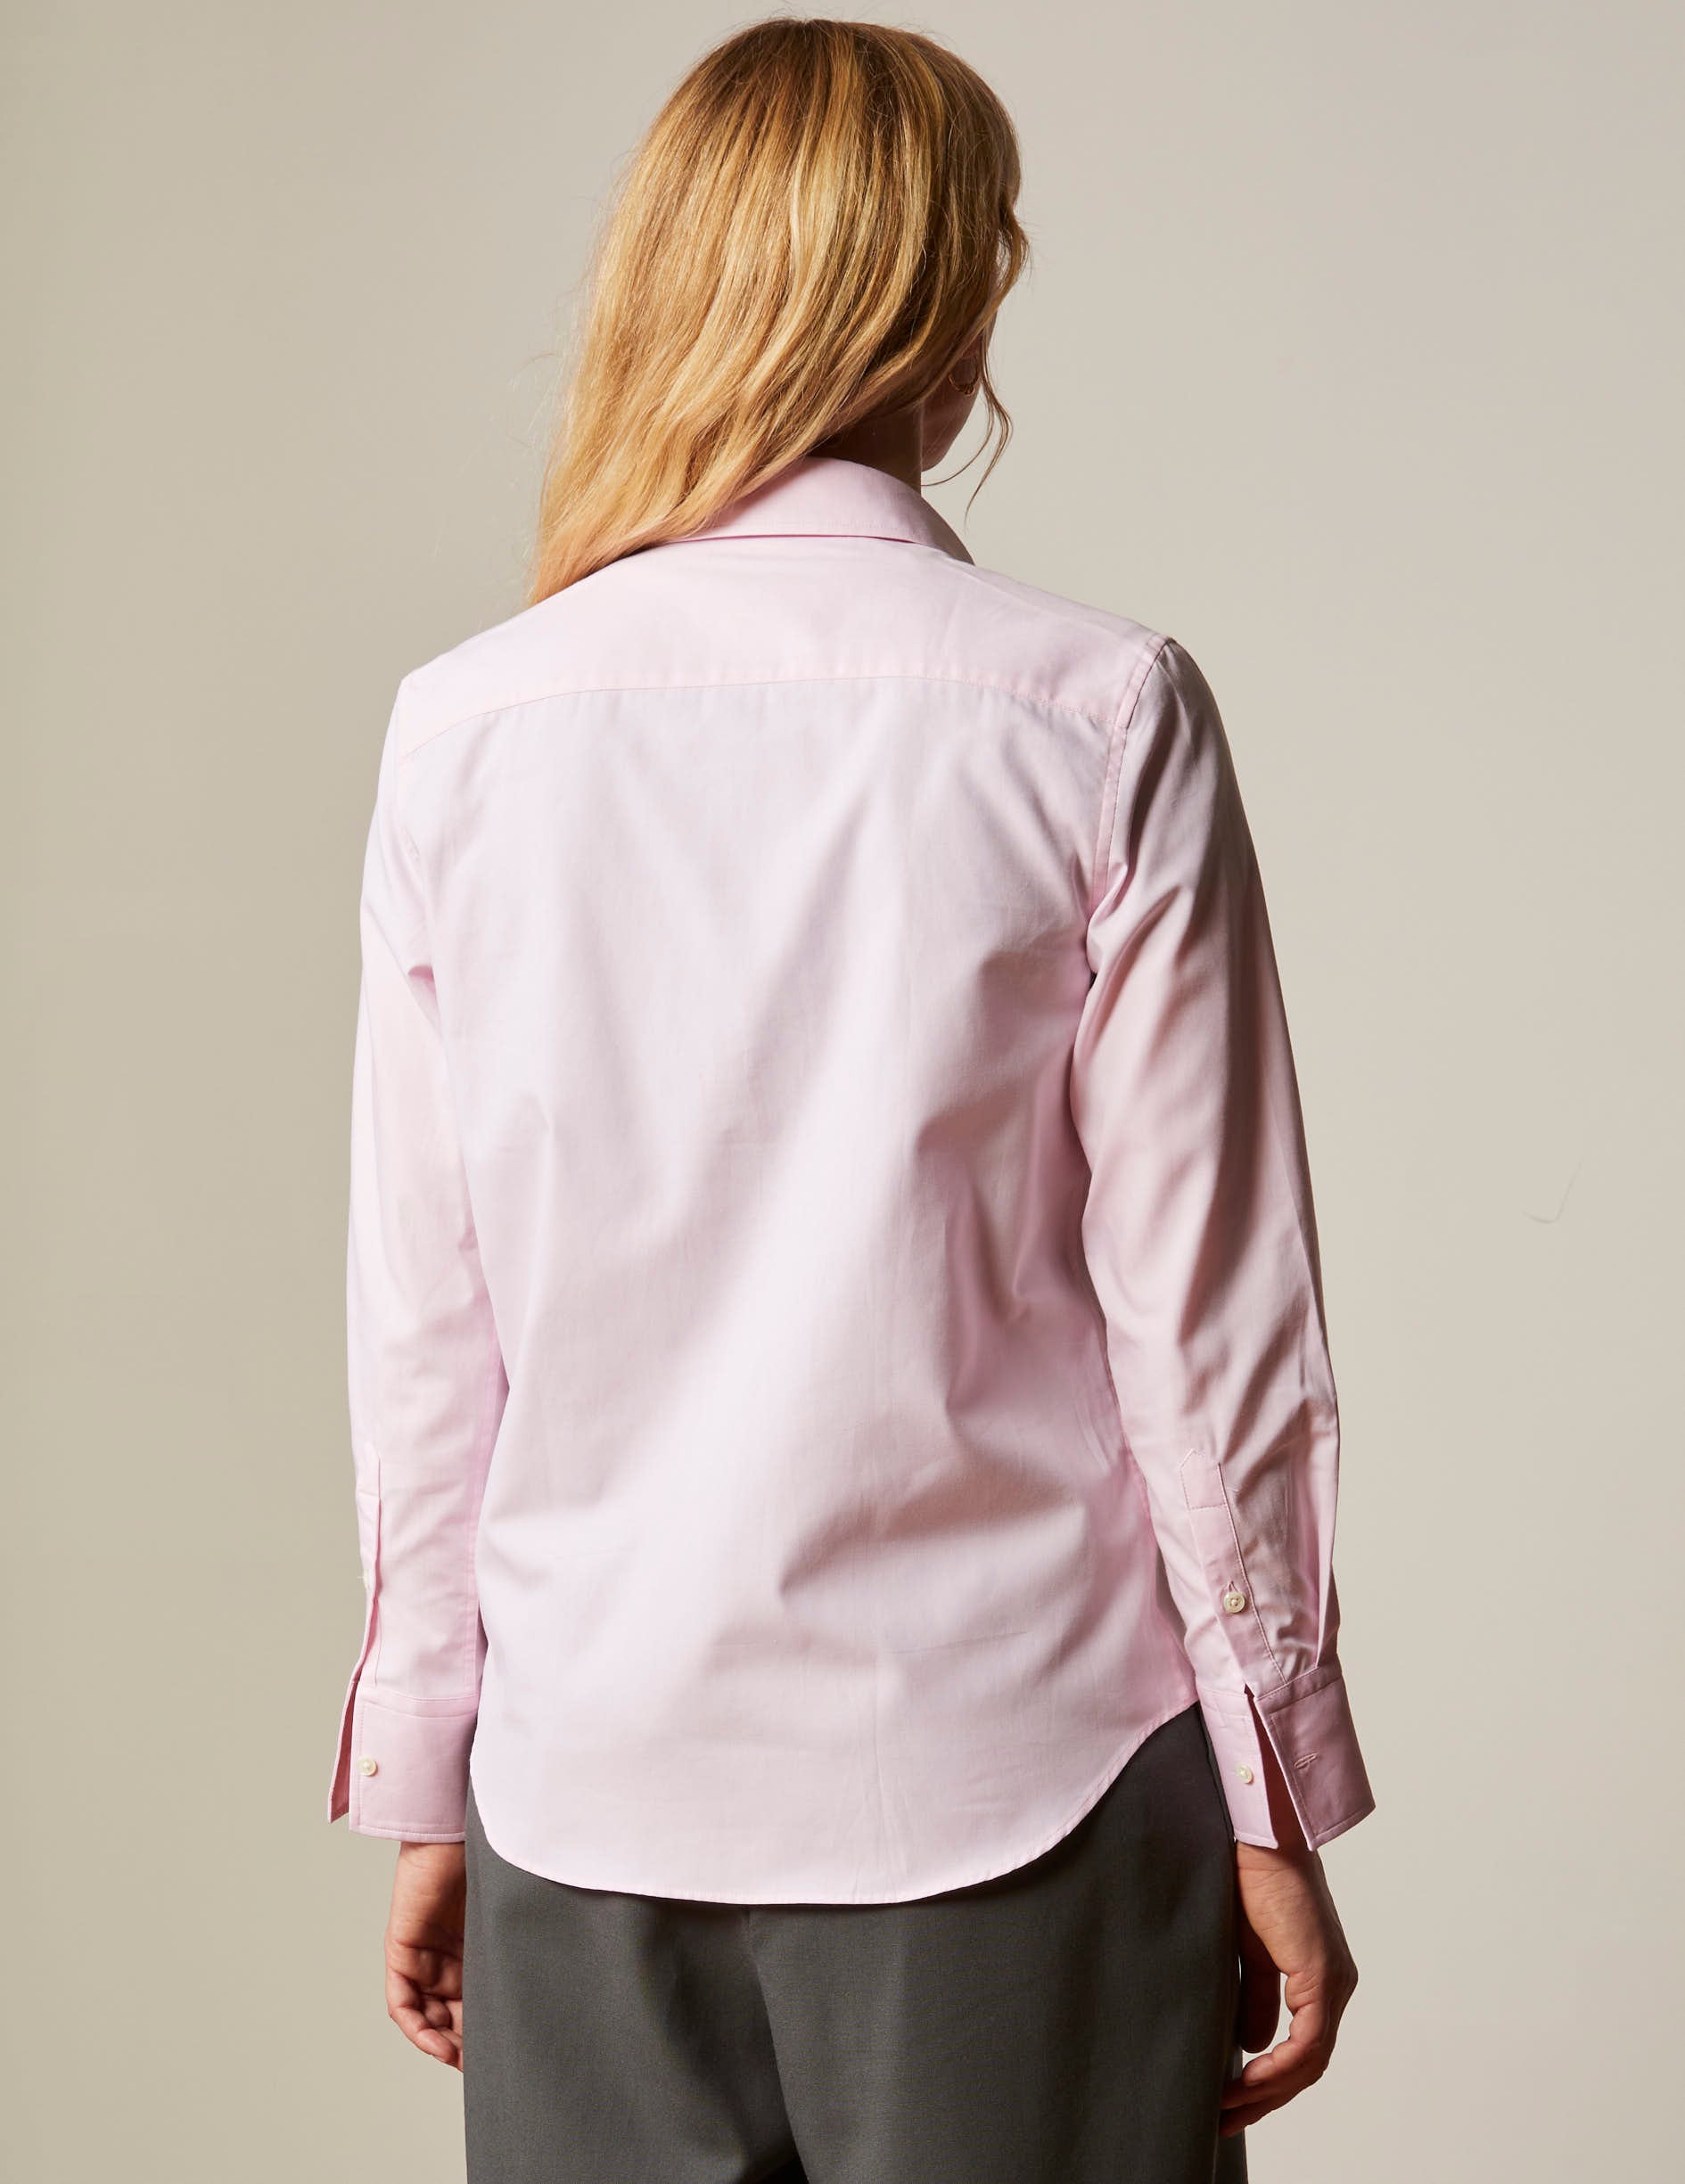 Chemise Marion rose - Pinpoint